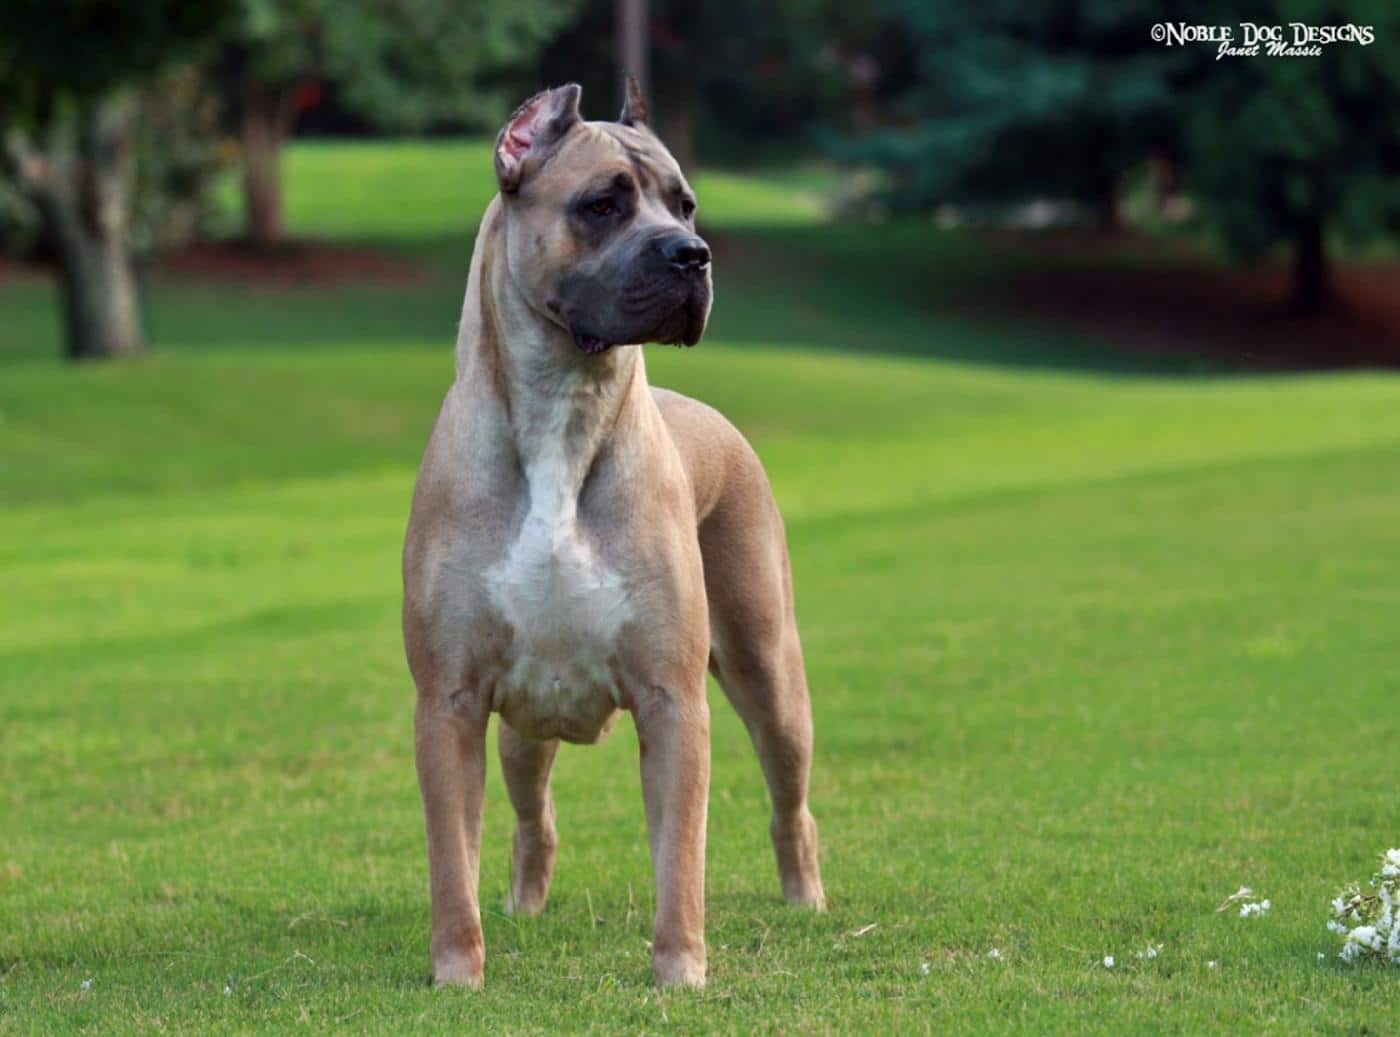 Giant Cane Corso Dog Showing off his Strength and Agility / The Great King Cane  Corso dogs